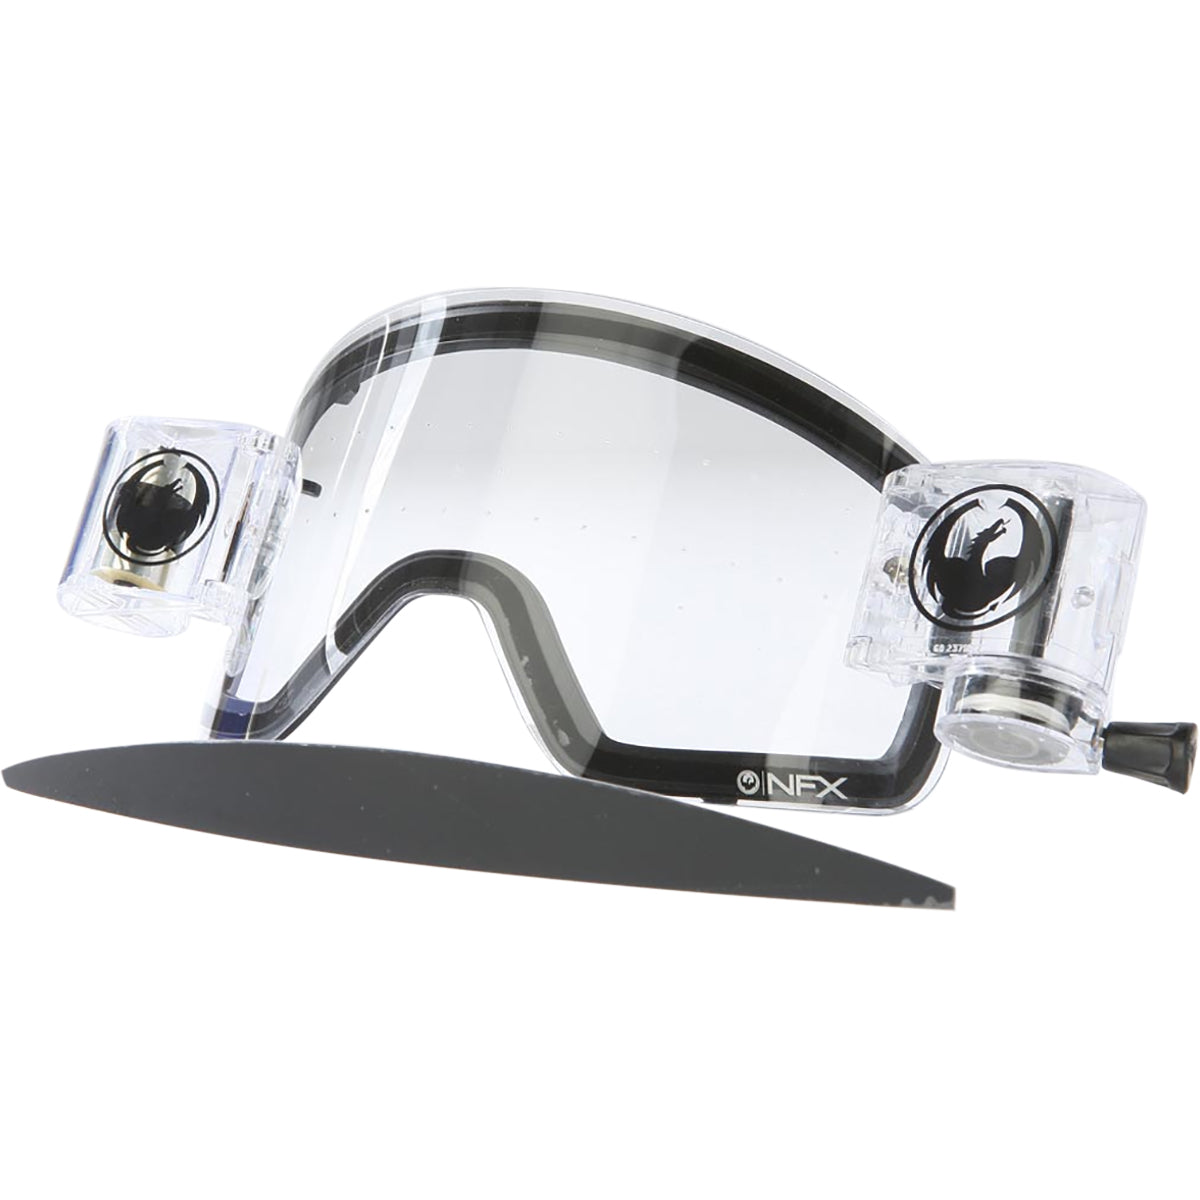 Dragon Alliance NFX Dimple Rapid Roll Replacement Lens Goggle Accessories-722-1797